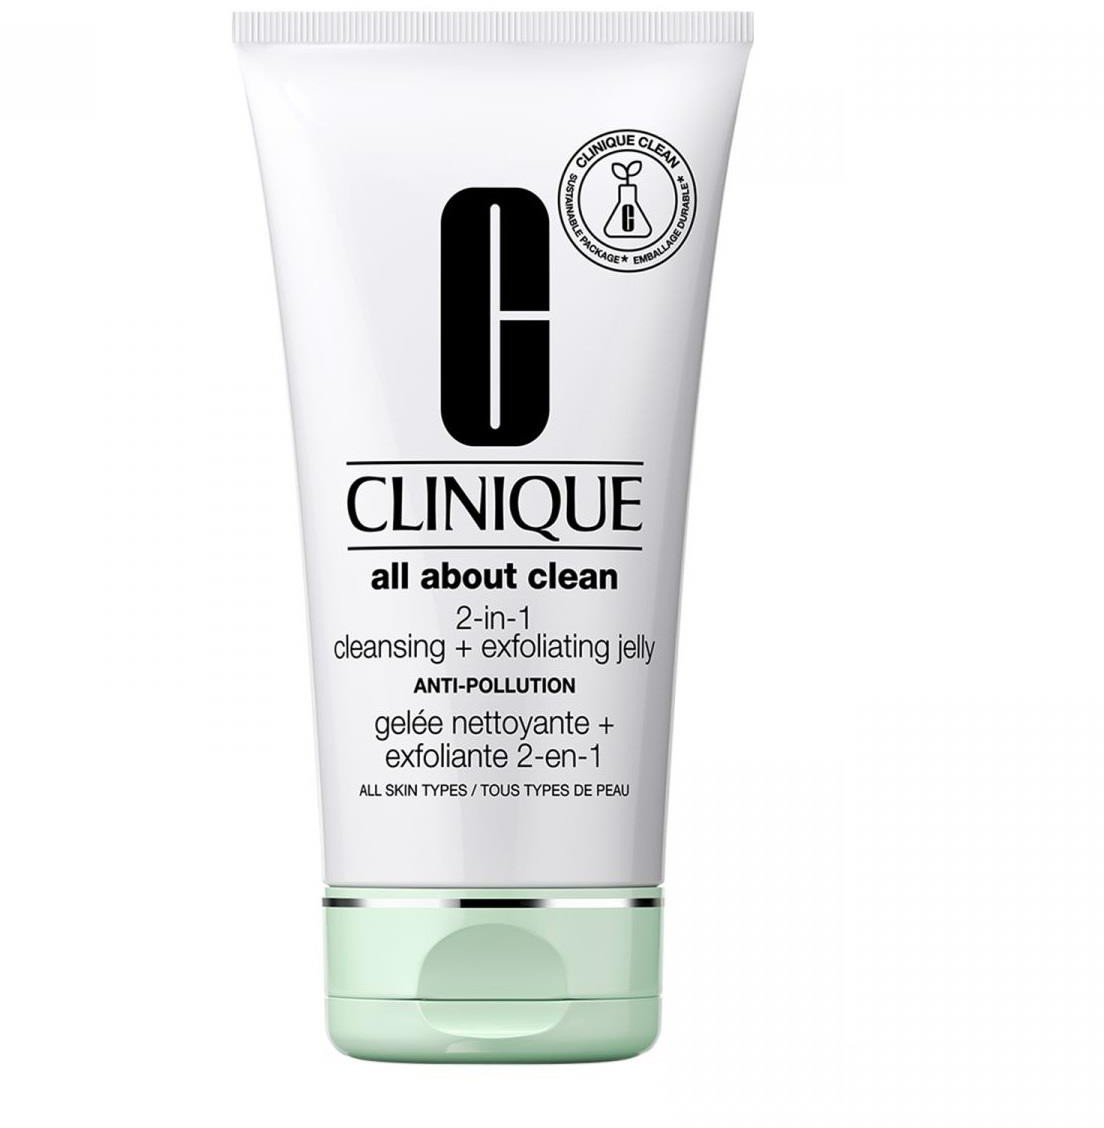 Clinique Clinique All About Clean 2-in-1 Cleansing + Exfoliating Jelly 2w1 150ml 106848-uniw